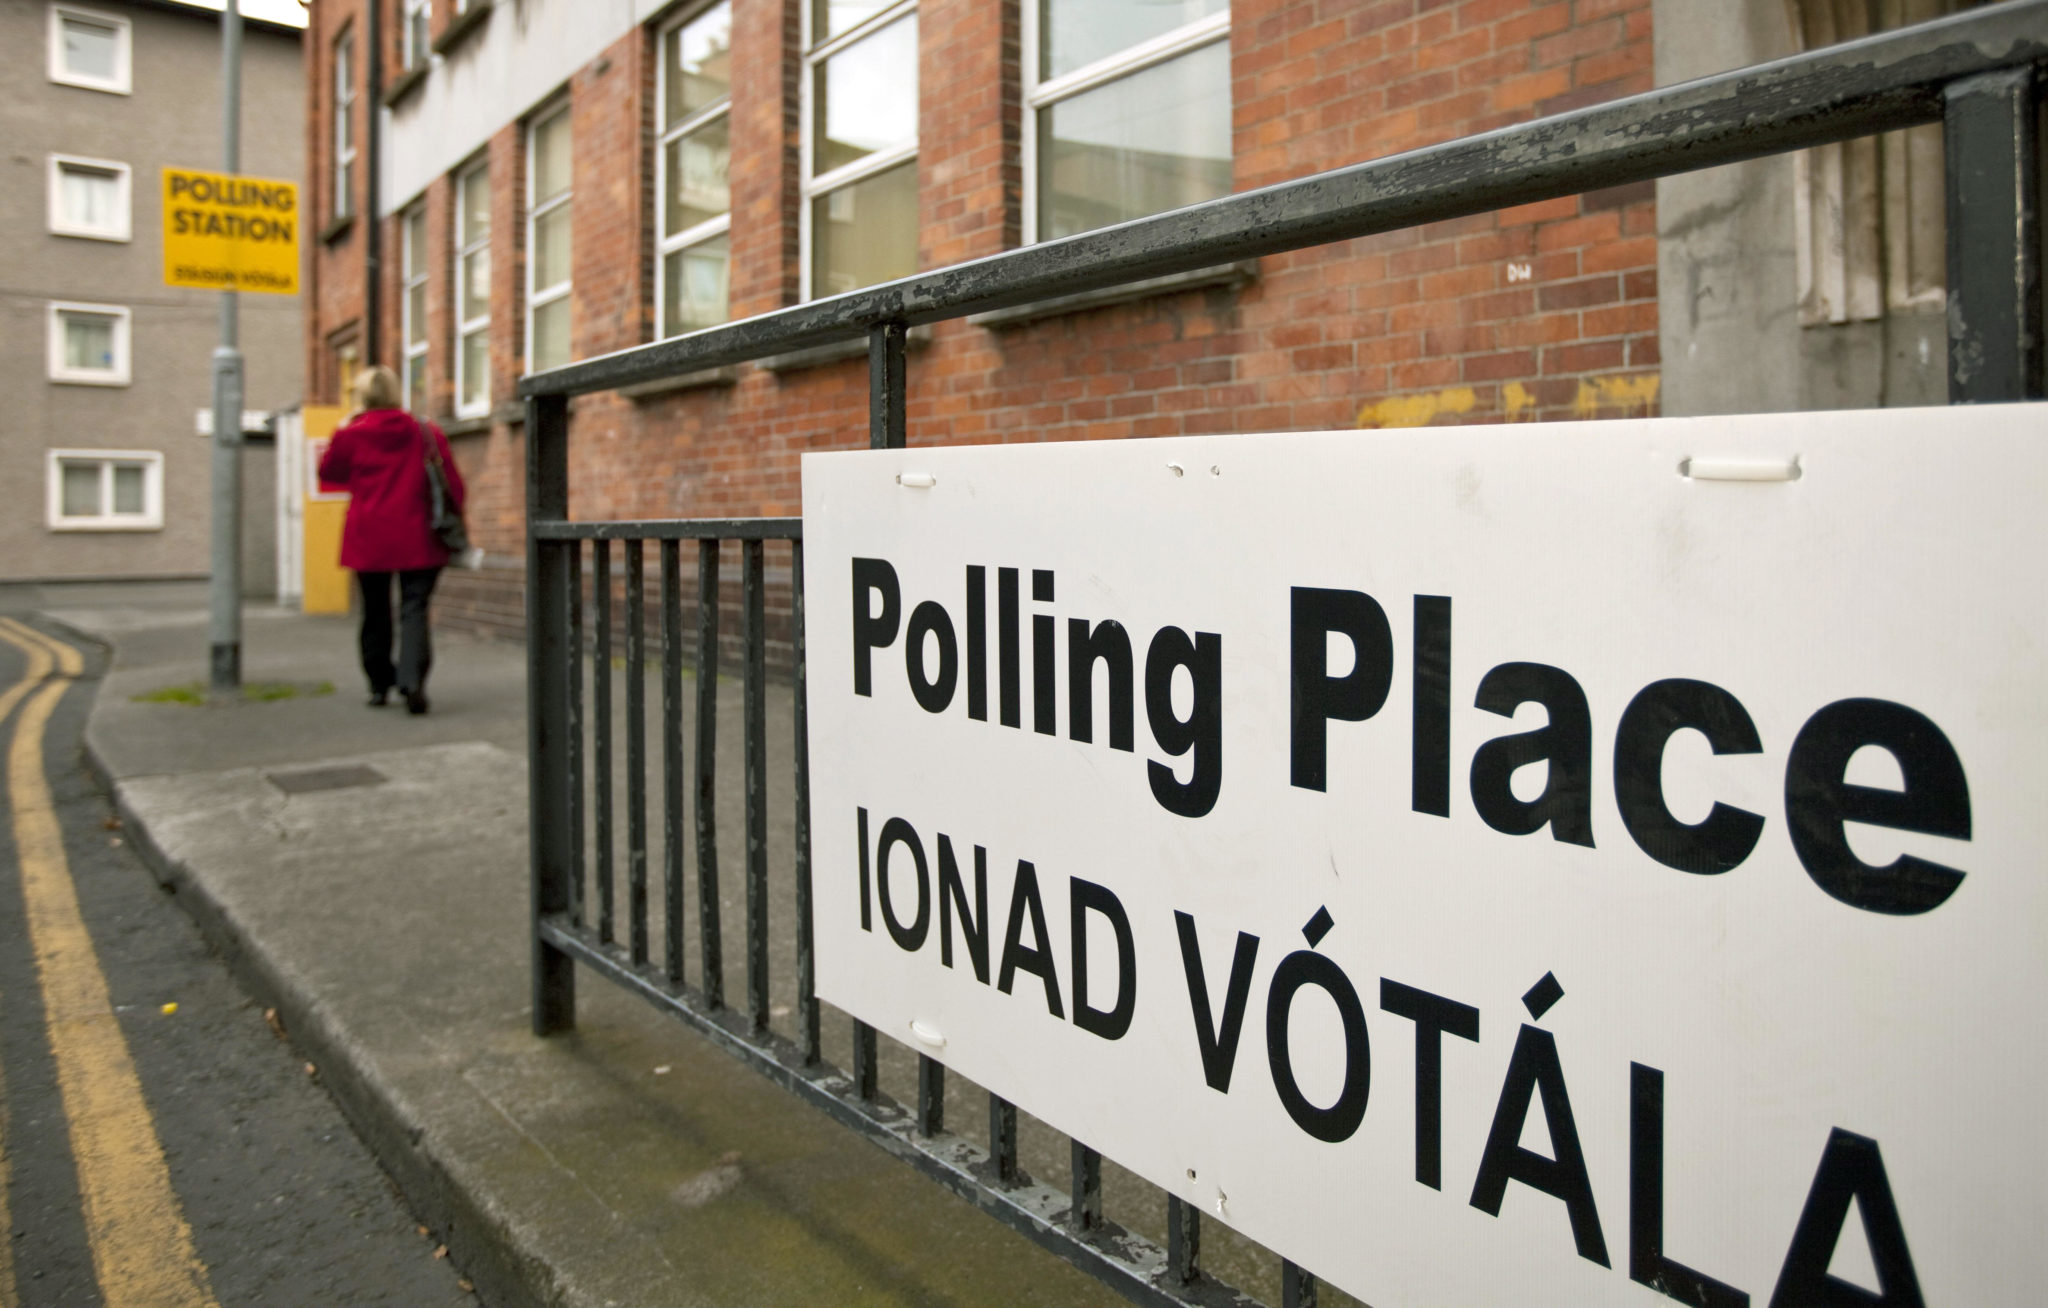 A sign in English and Irish points to a polling station in Dublin for the second EU referendum on the Treaty of Lisbon in October 2009